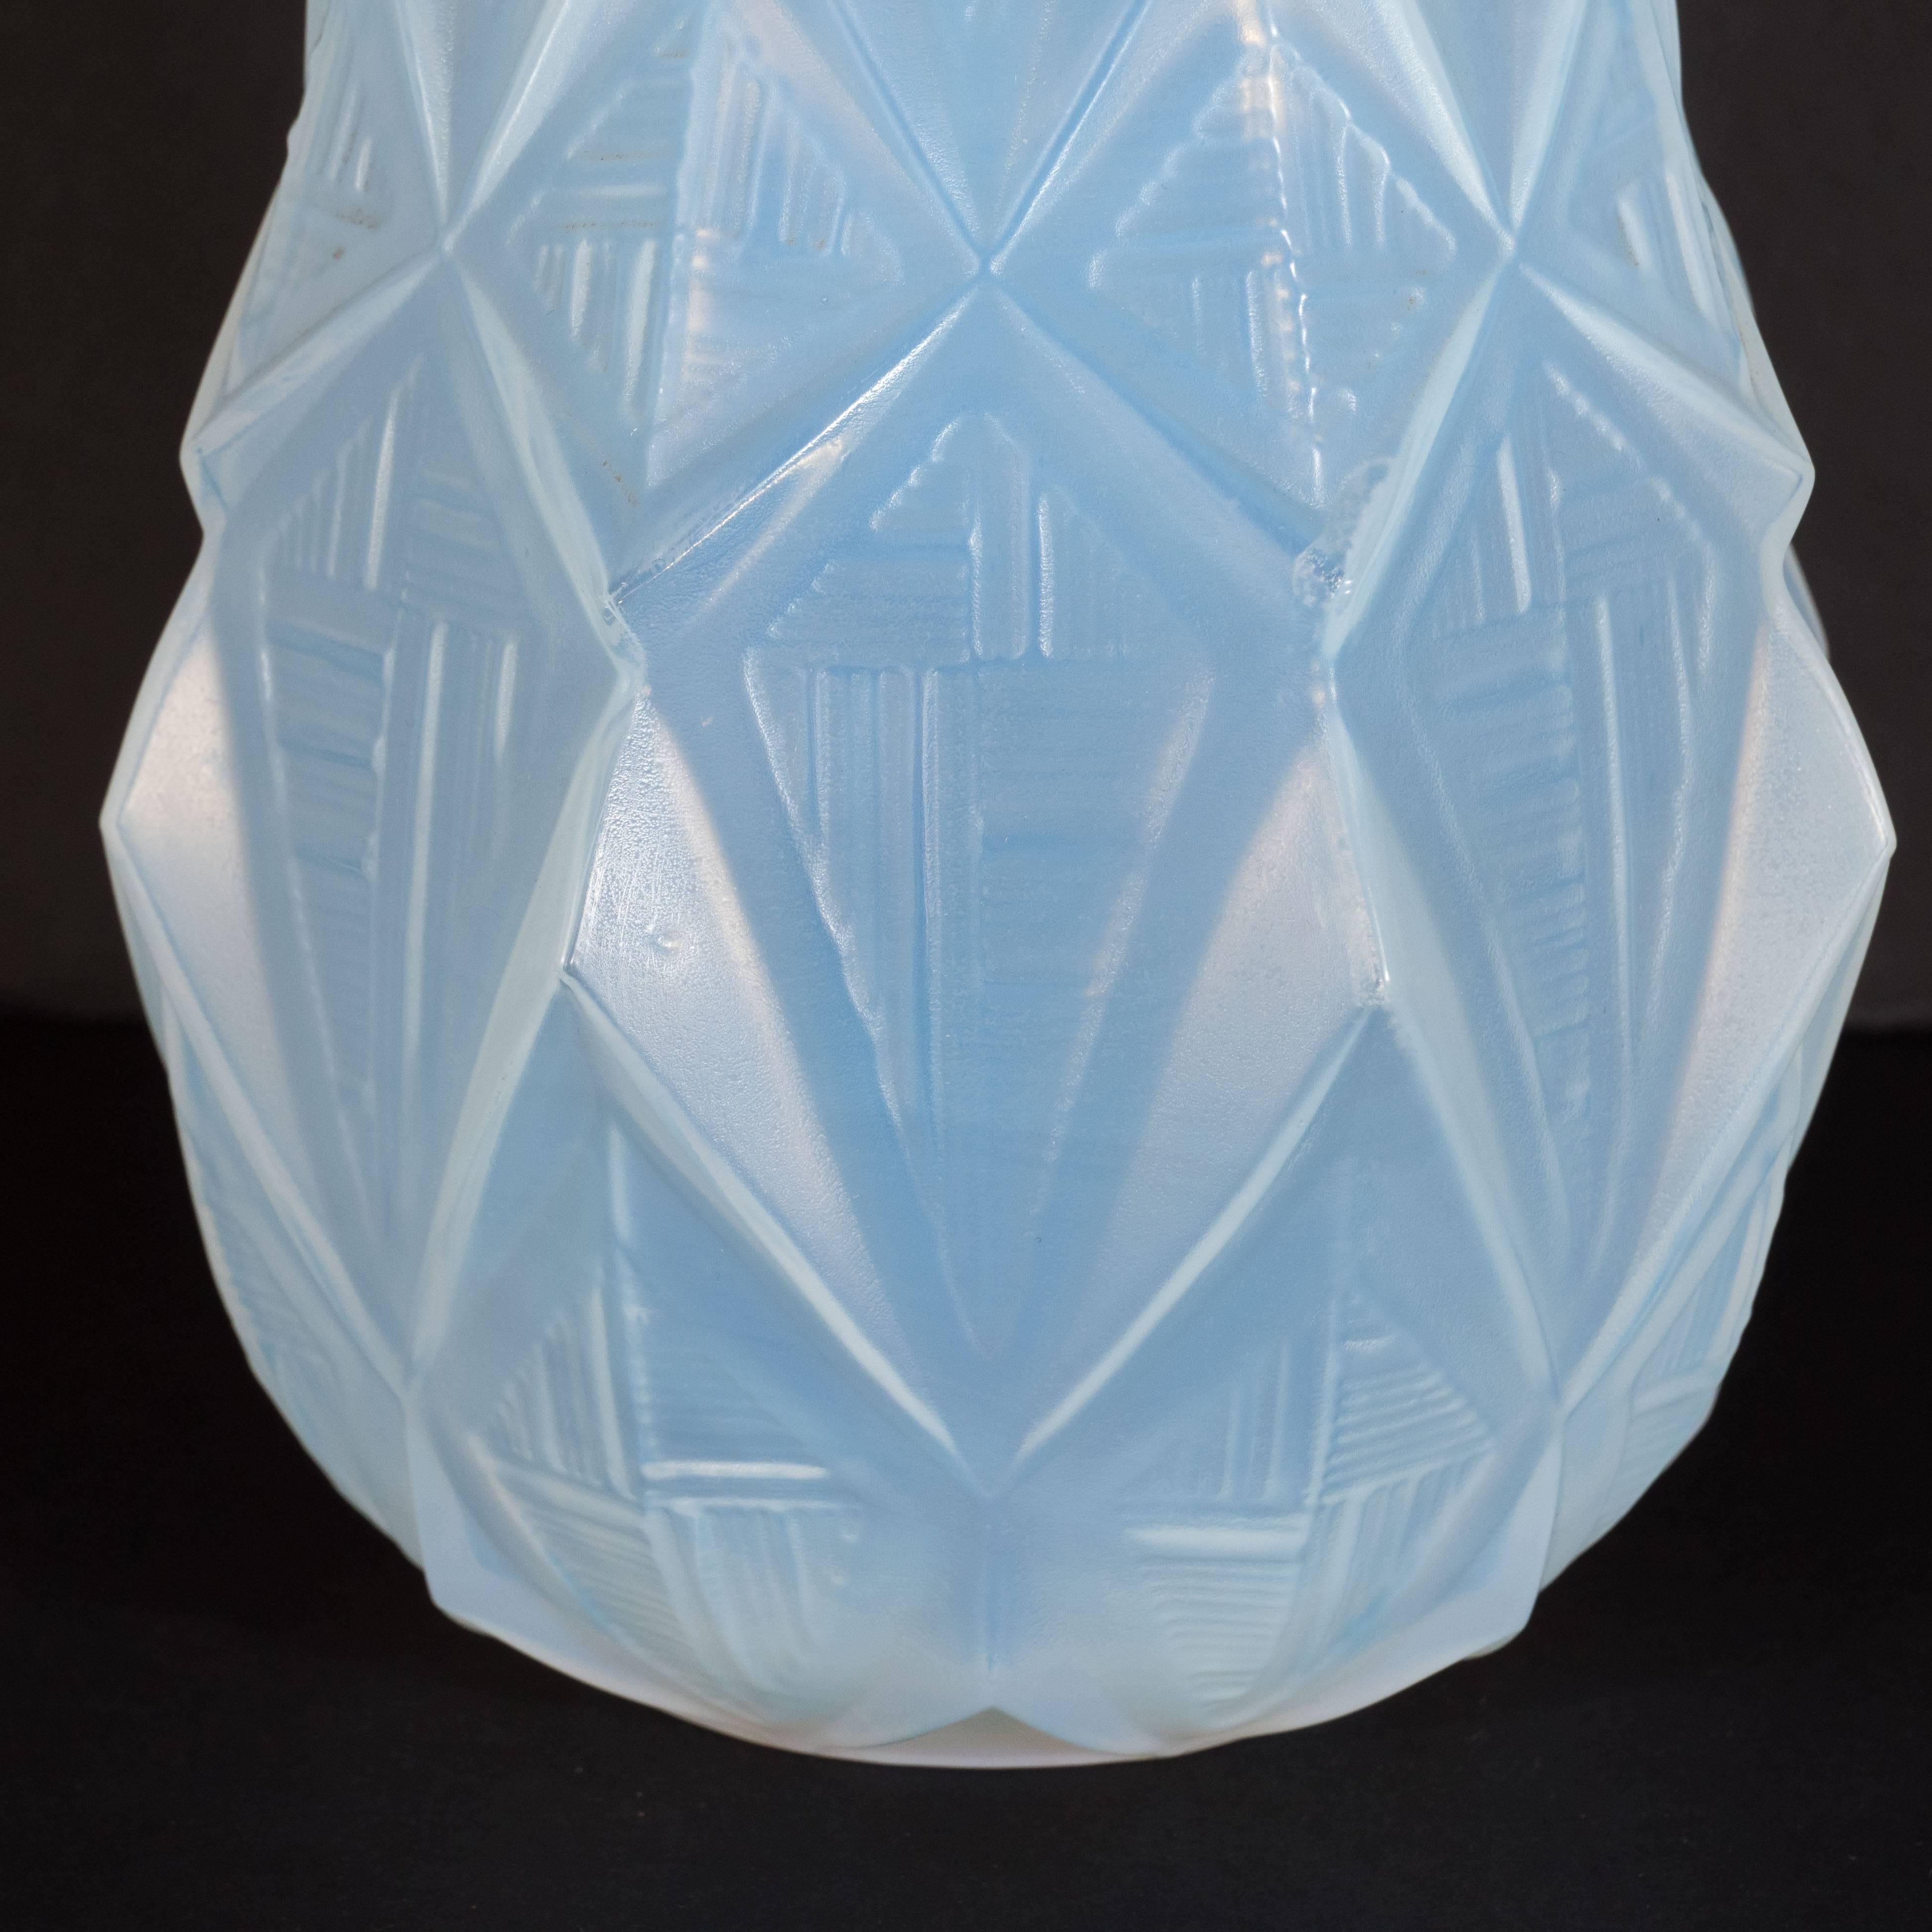 French Art Deco Opalescent Vase with Geometric Patterns in Relief Signed Sabino 2